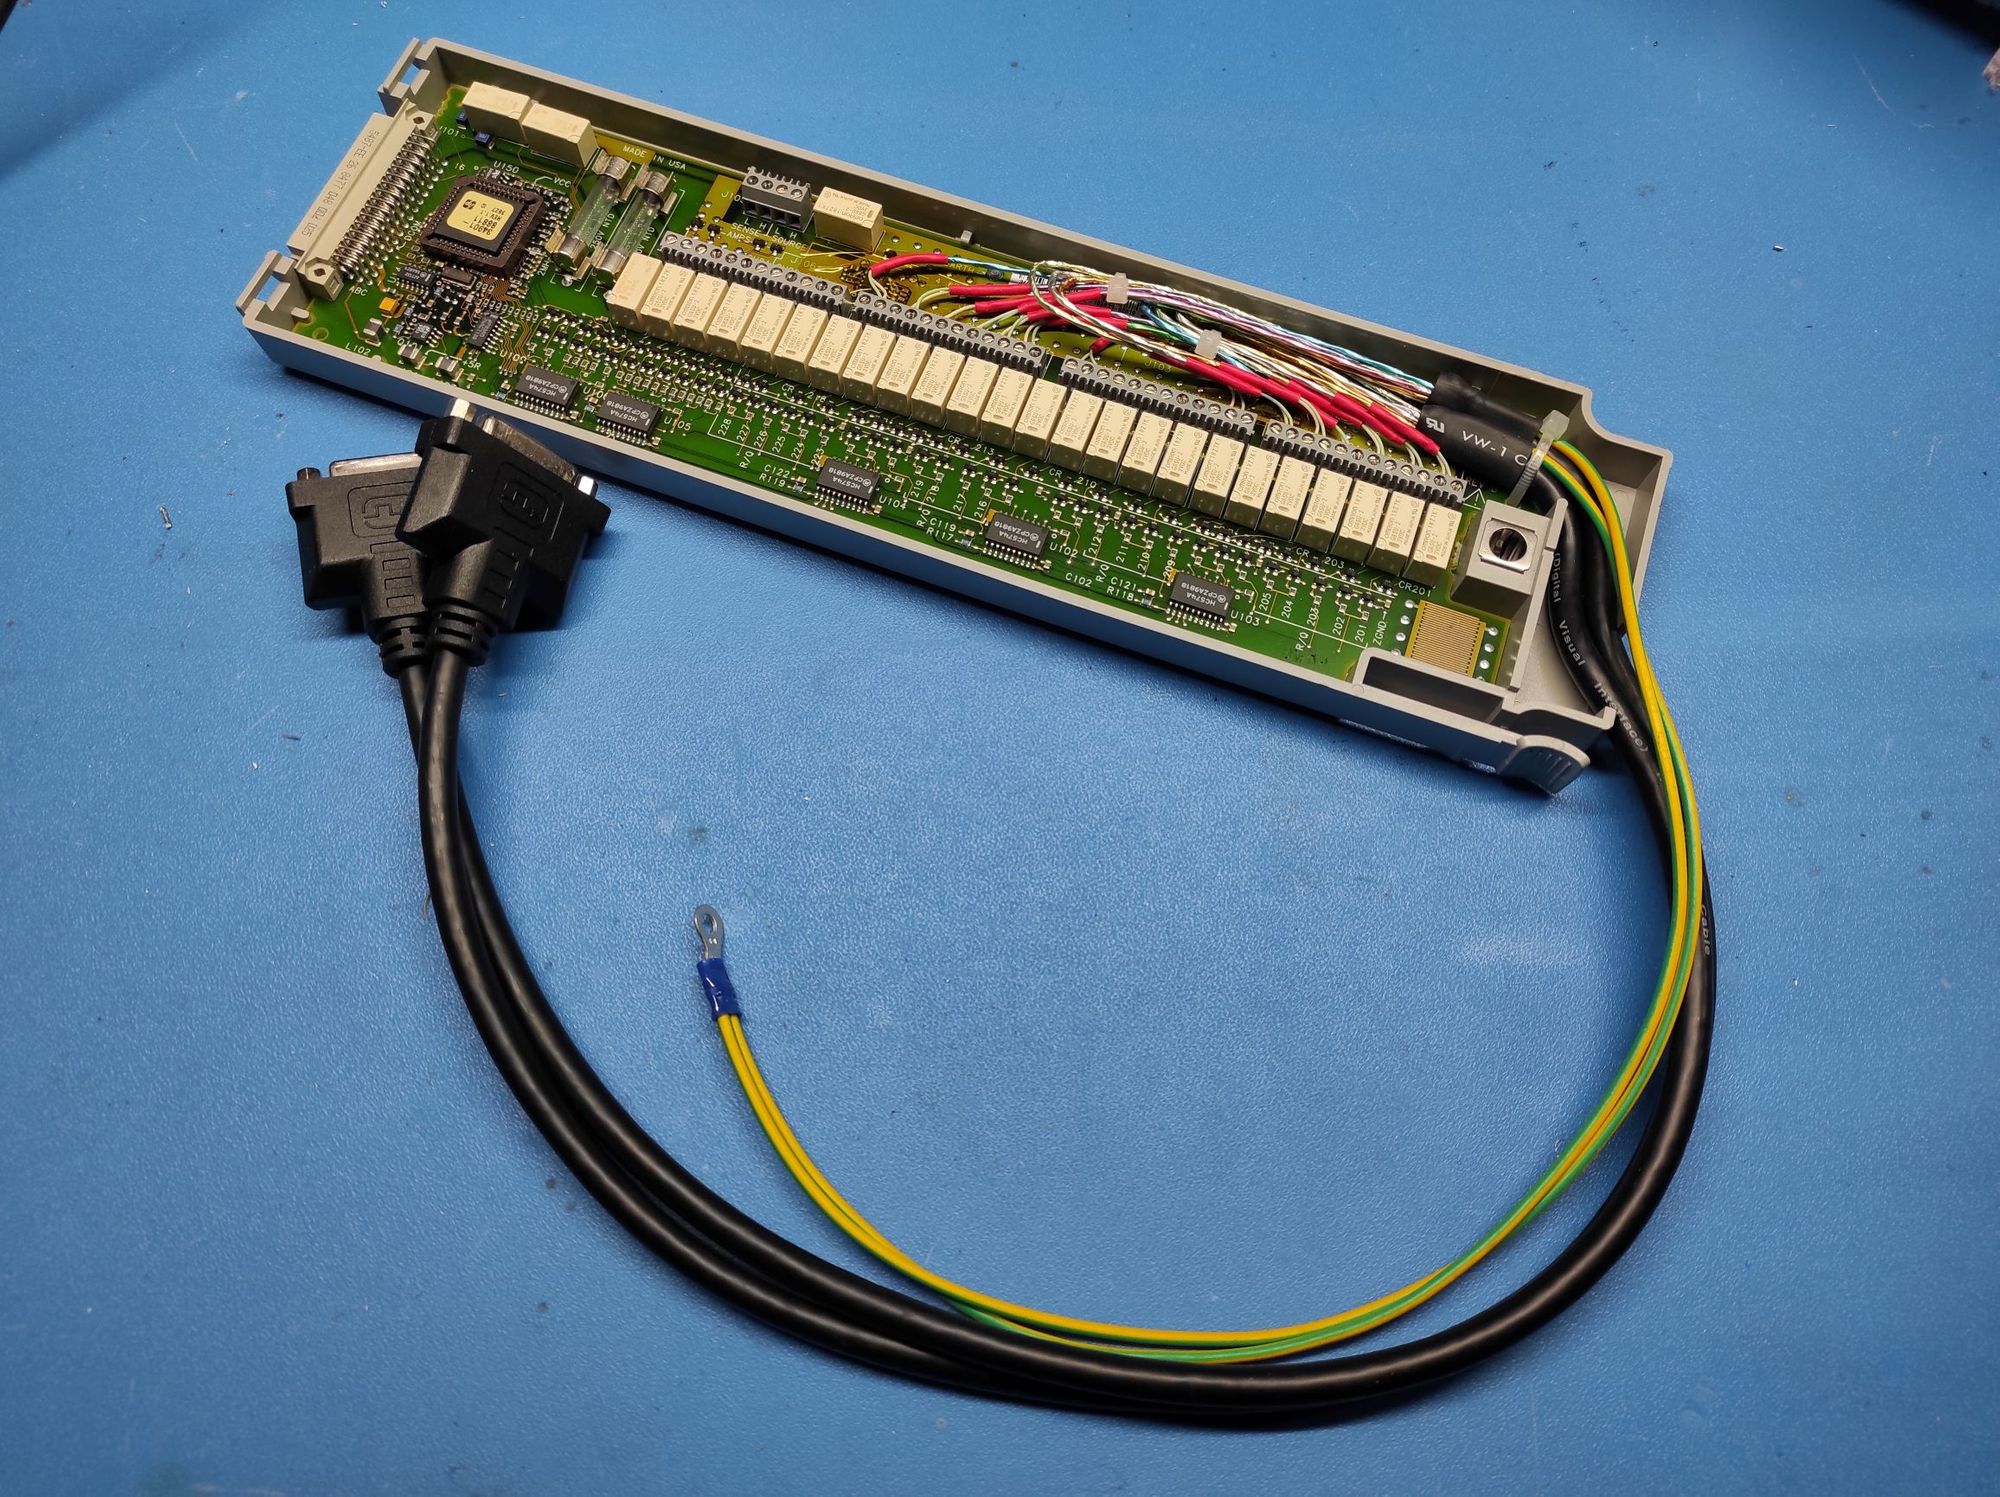 Wiring the HP 34901A multiplexer